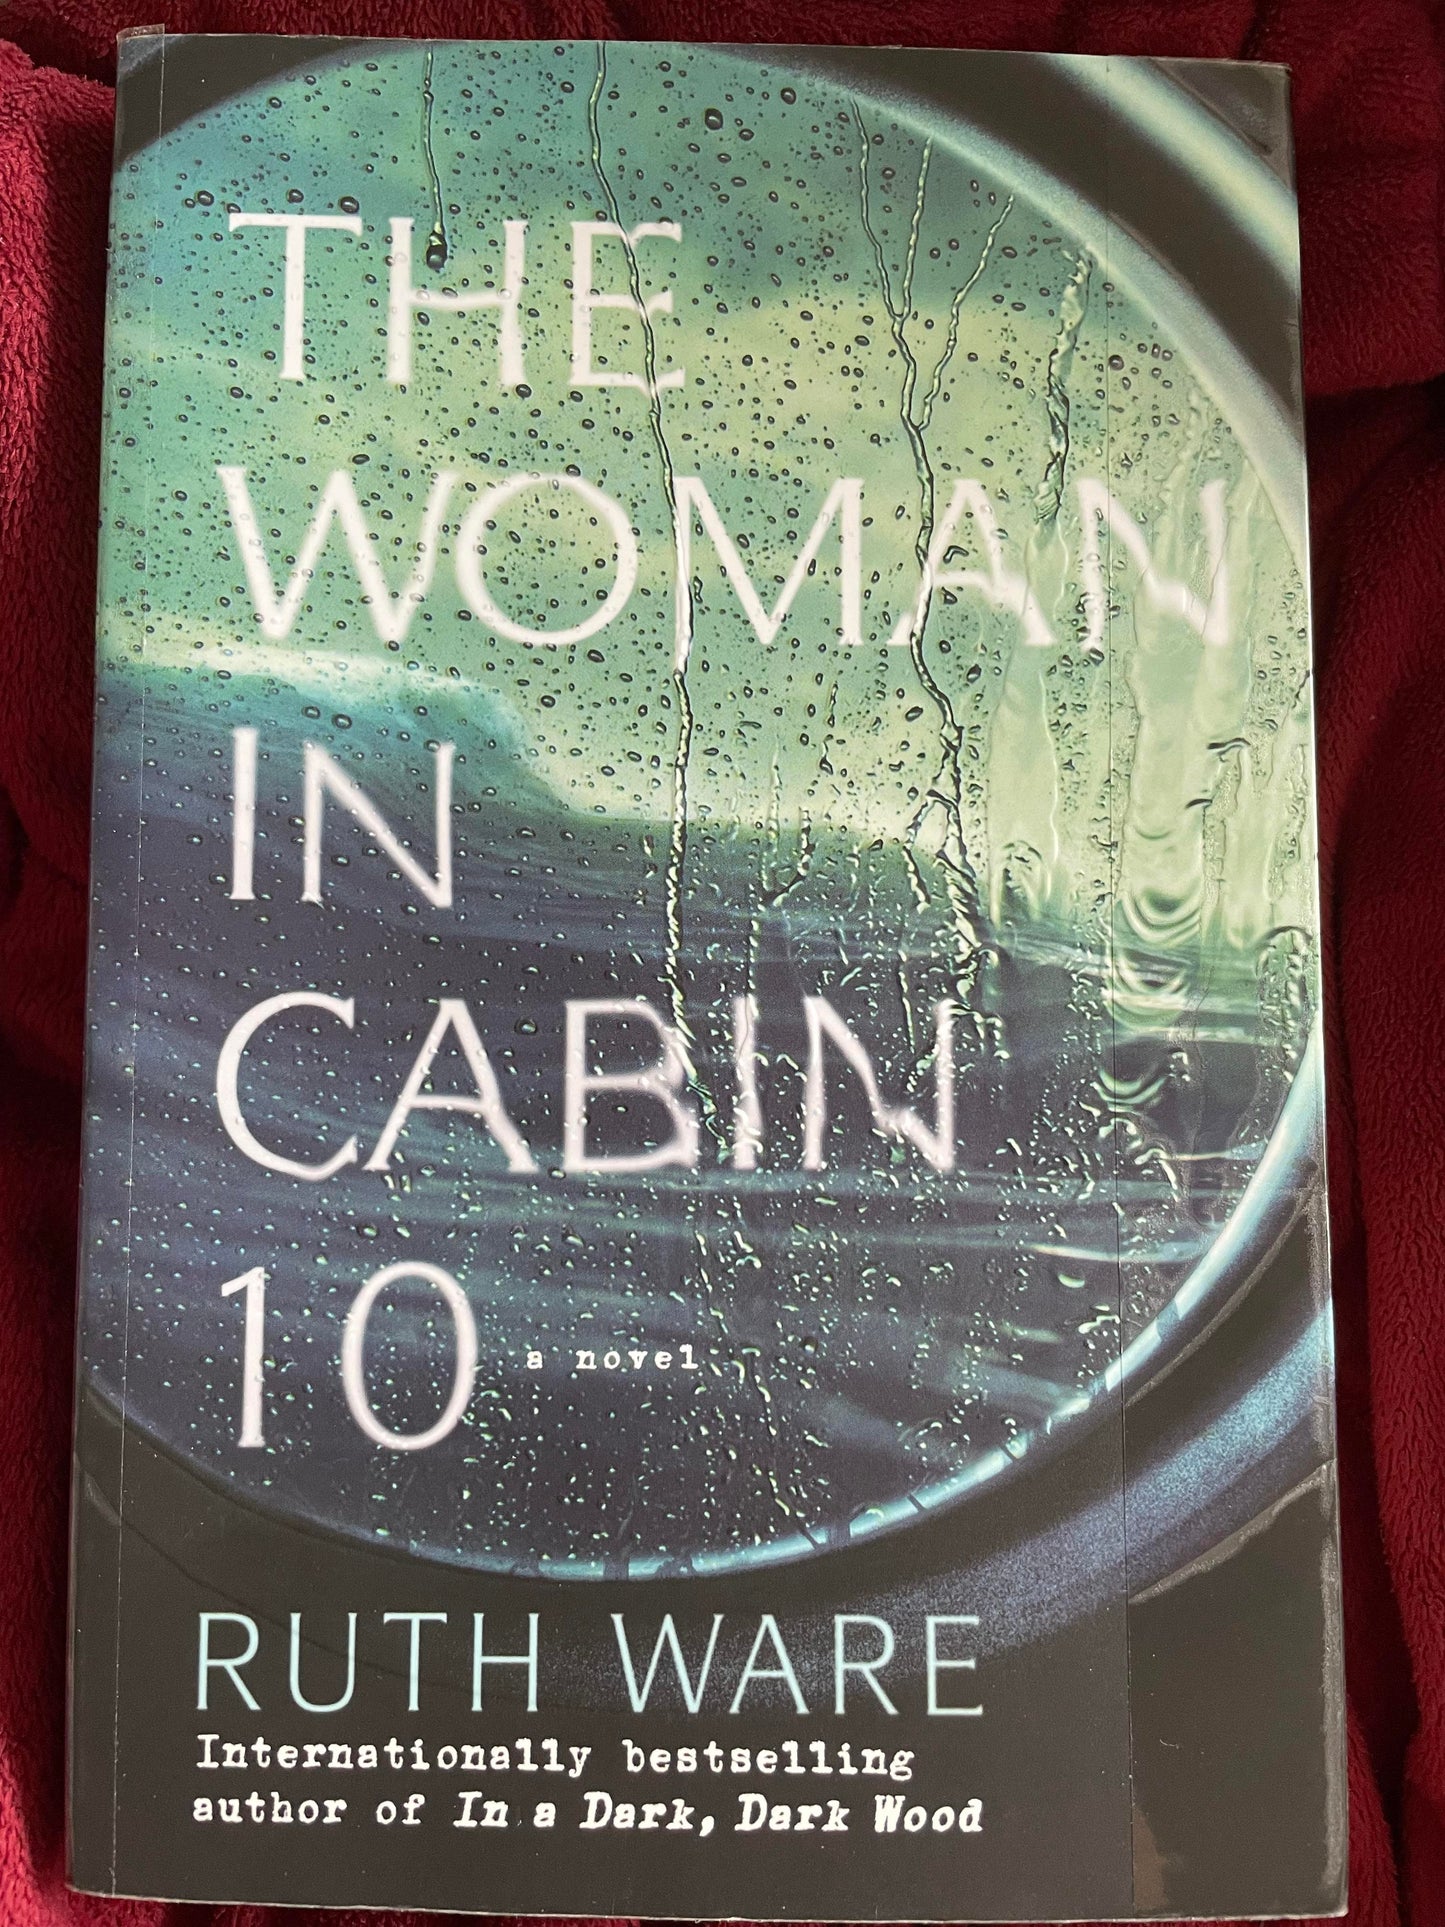 The Woman in Cabin 10 Paperback